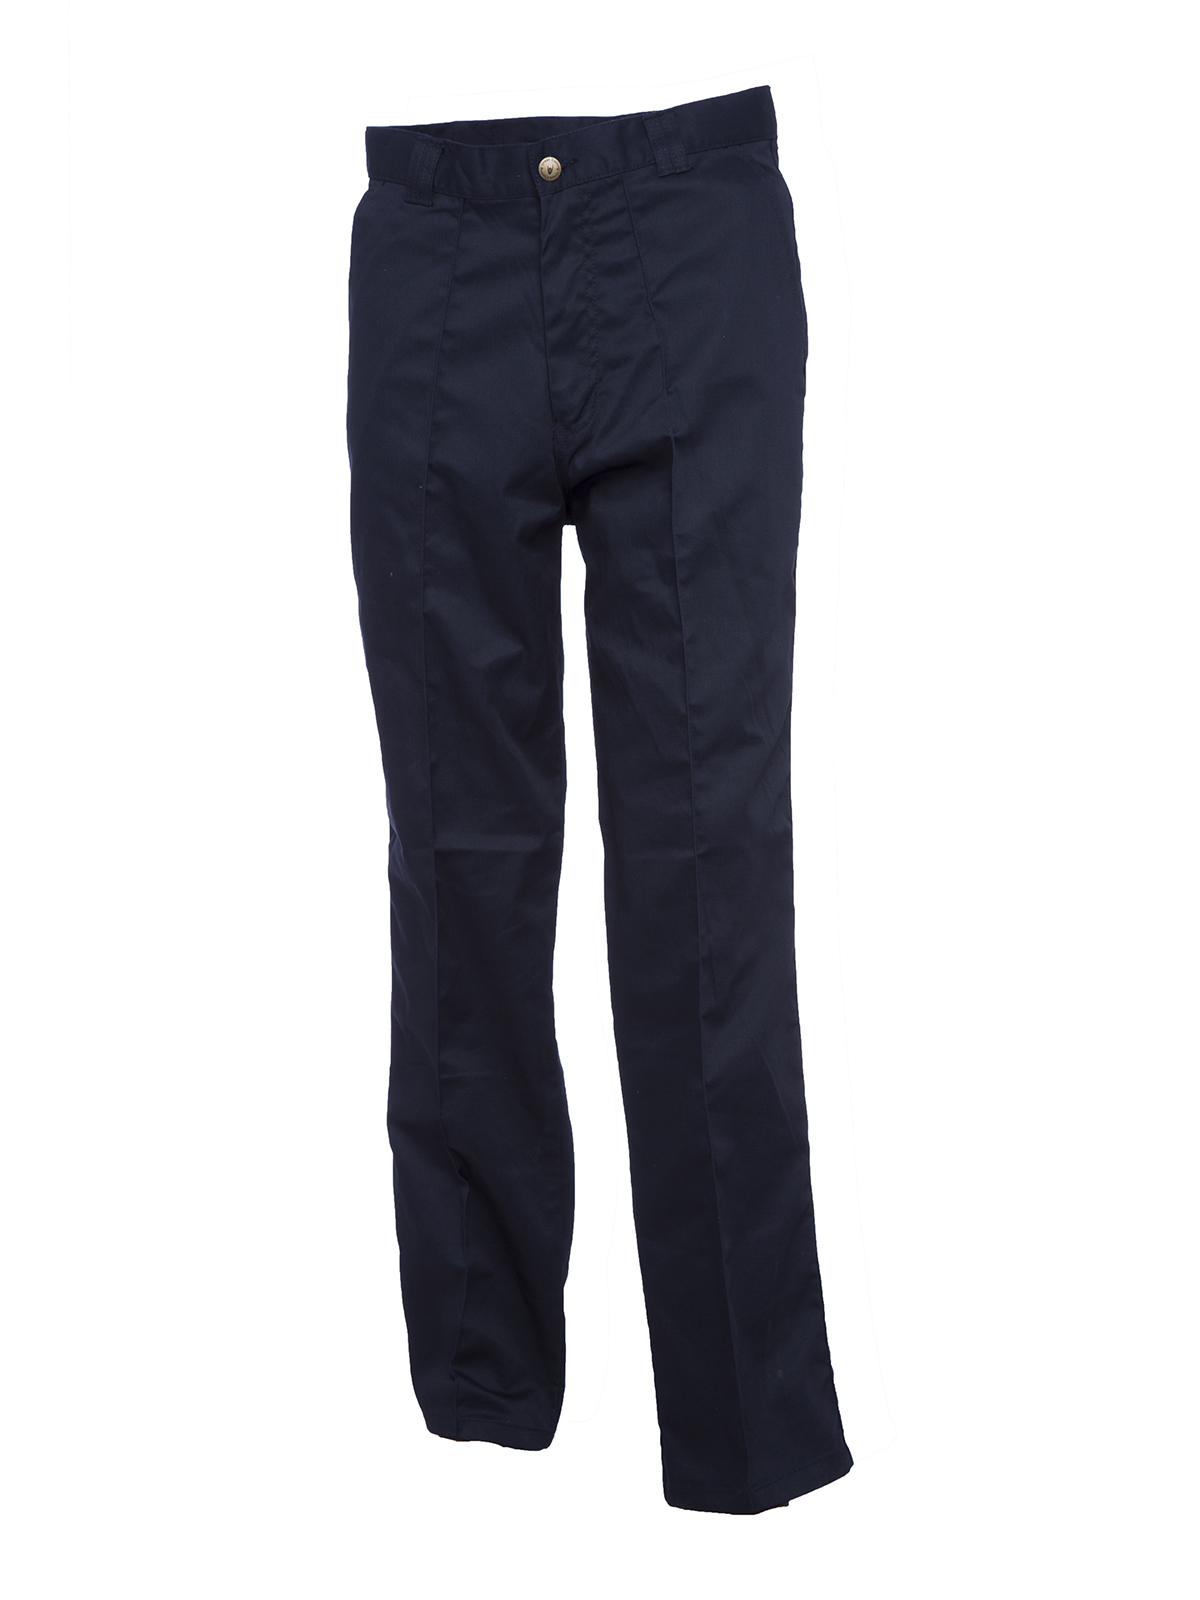 Workwear Trousers, Navy Blue - 38R